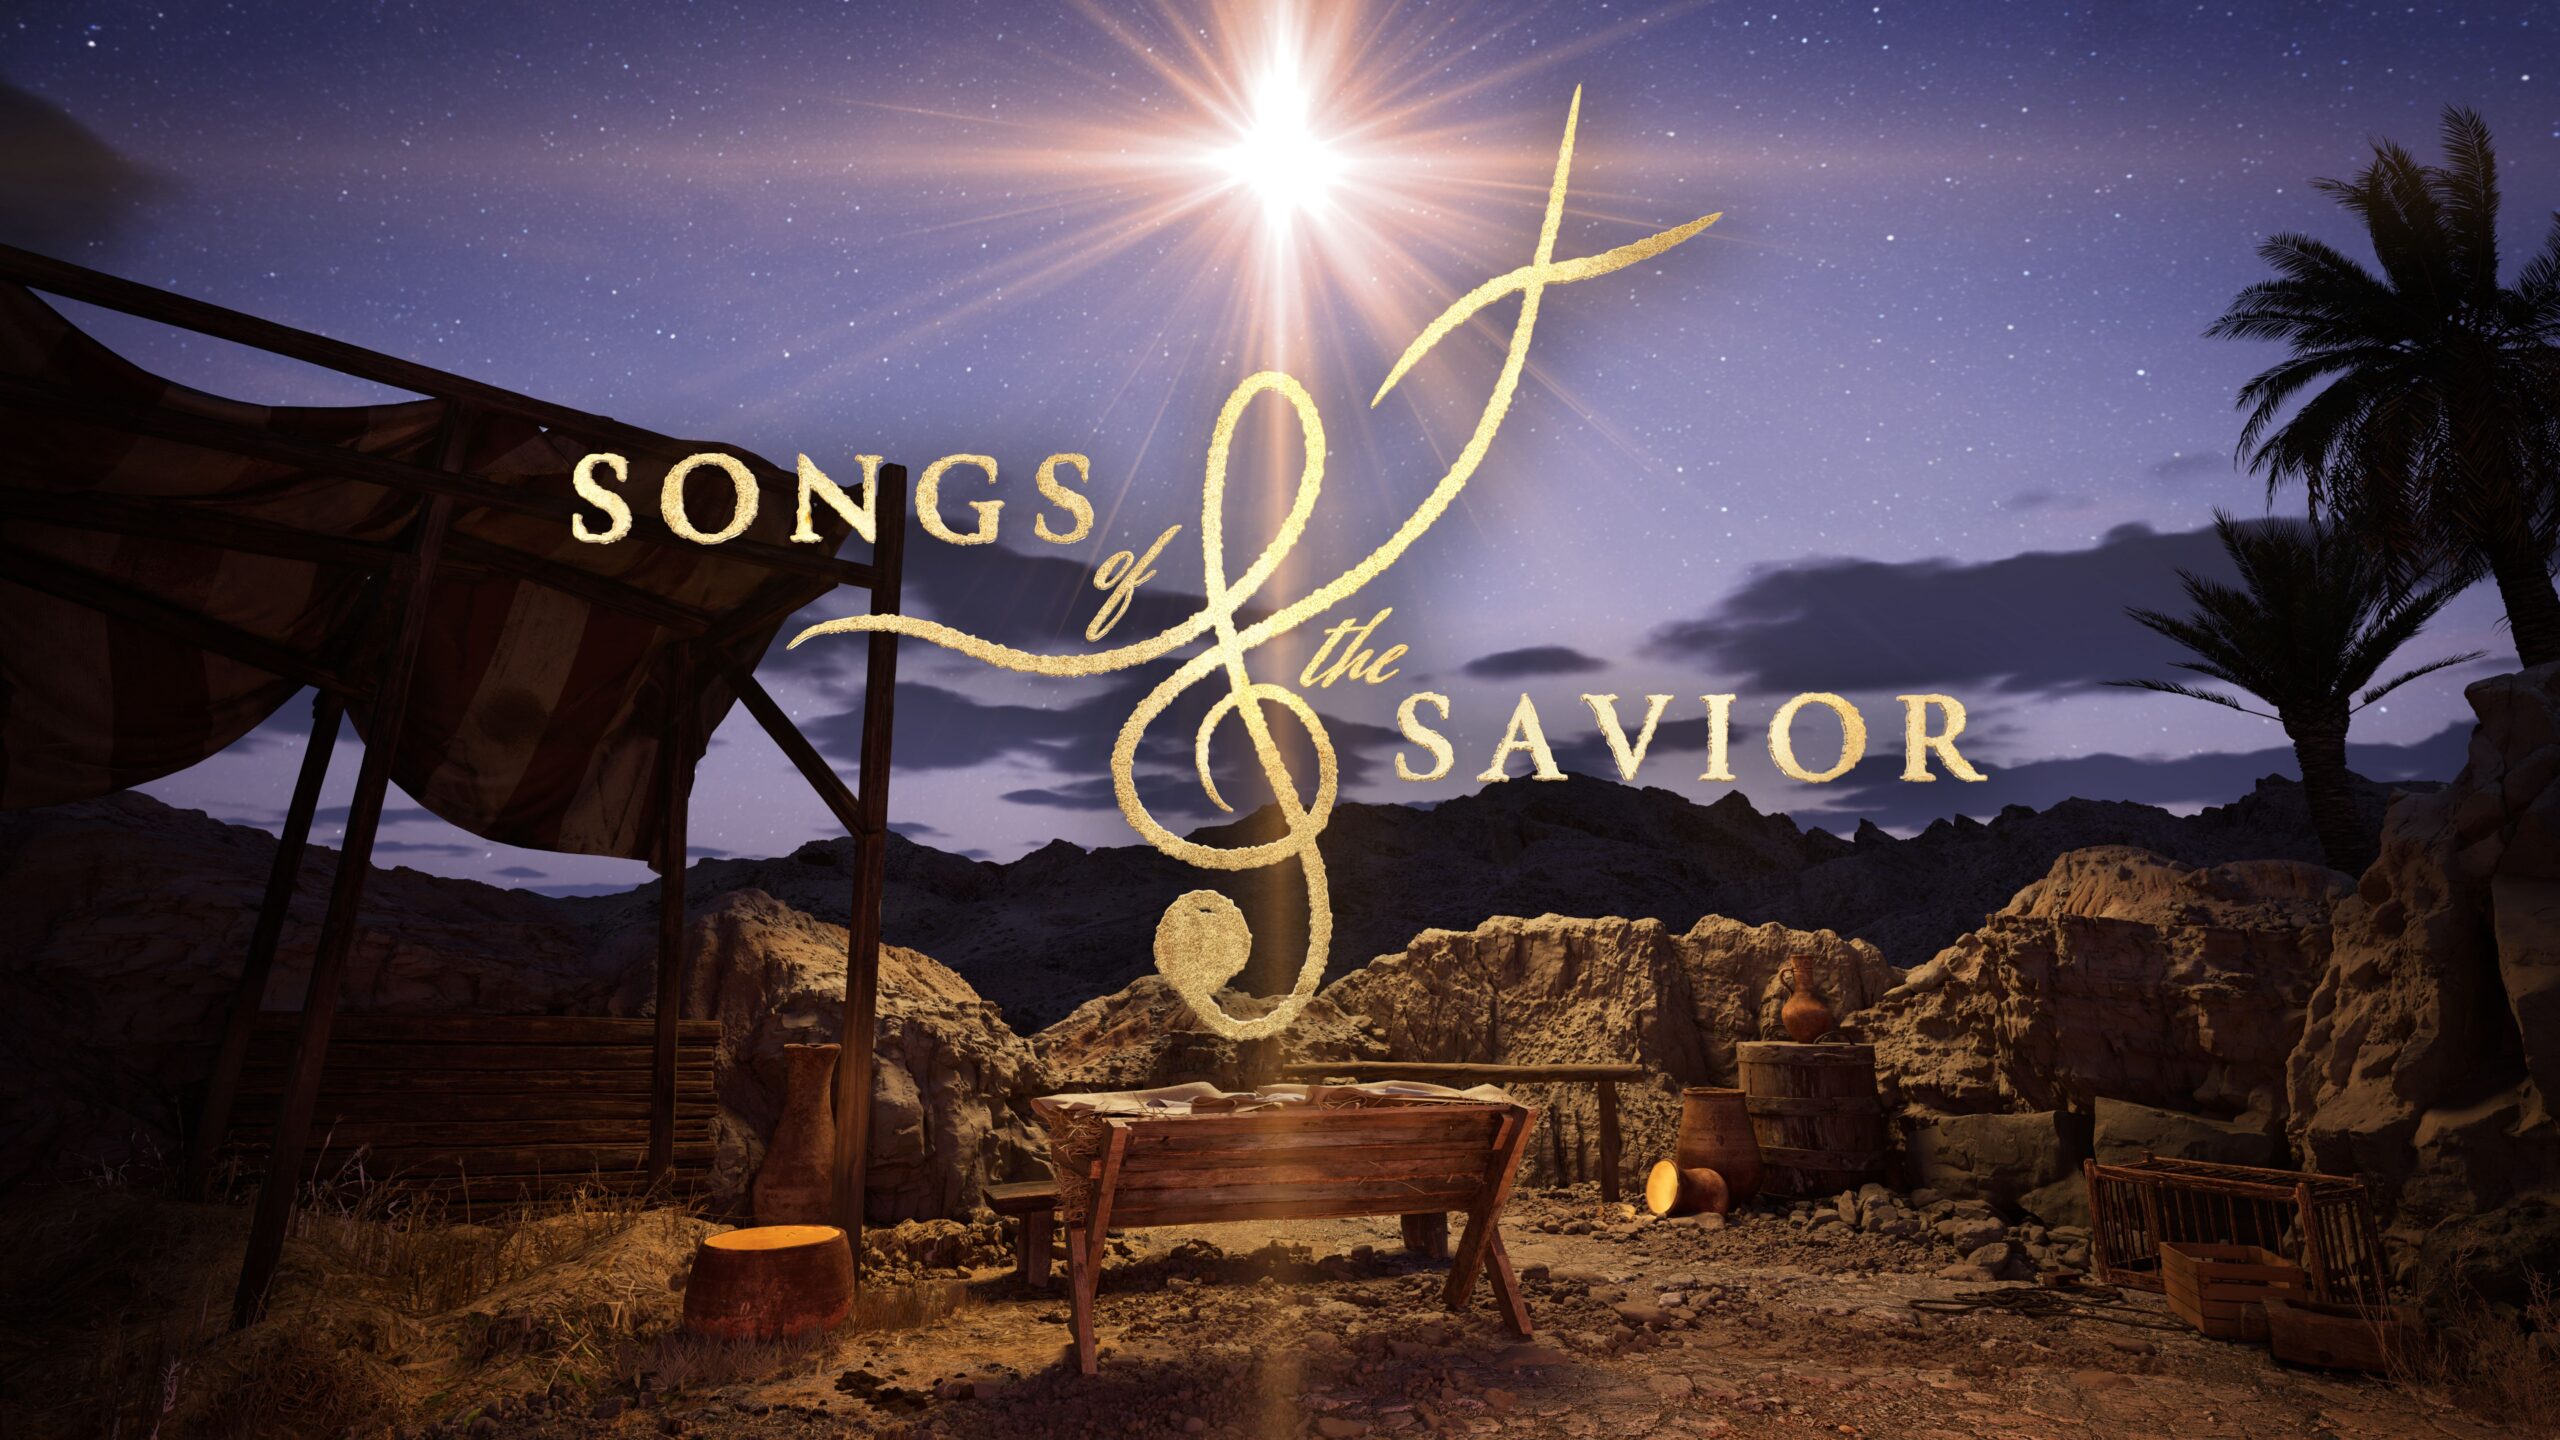 Songs of the Savior: “Come Thou Long-Expected Jesus”